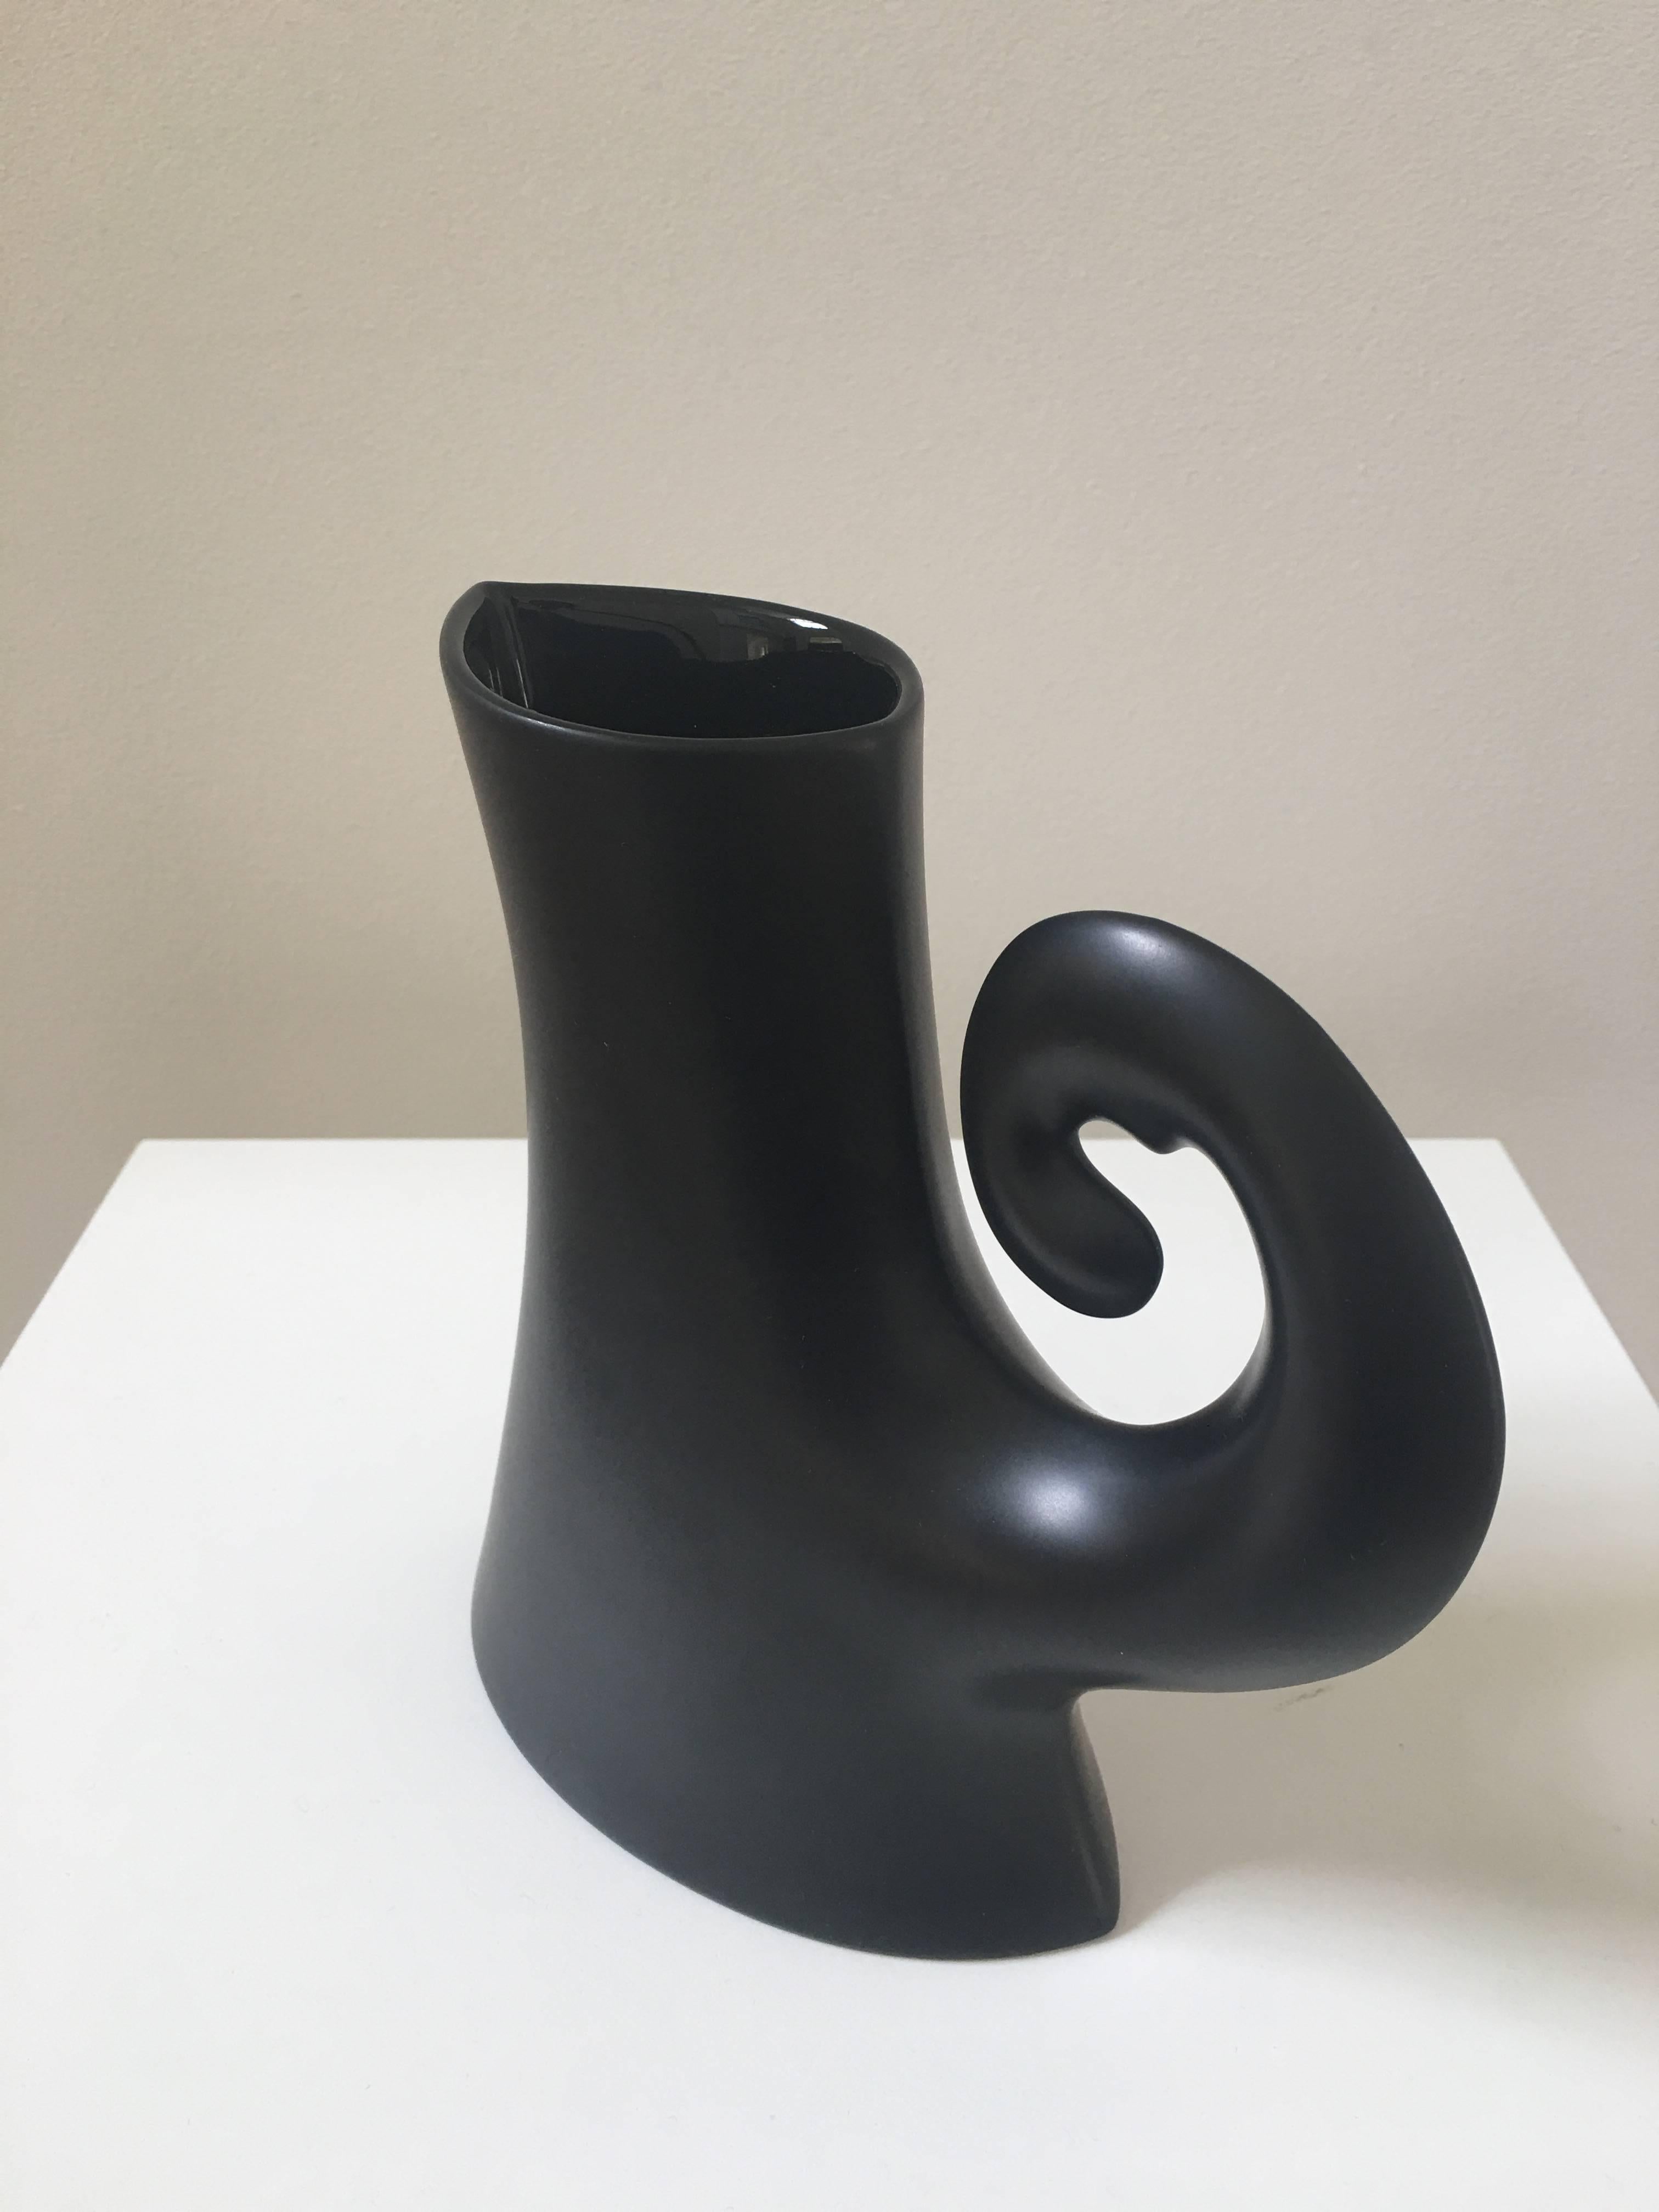 With the most wonderful curly handle, the design of this pitcher is pure fantasy. Aptly made in black the pitcher forms a sculptural silhouette and is almost new.